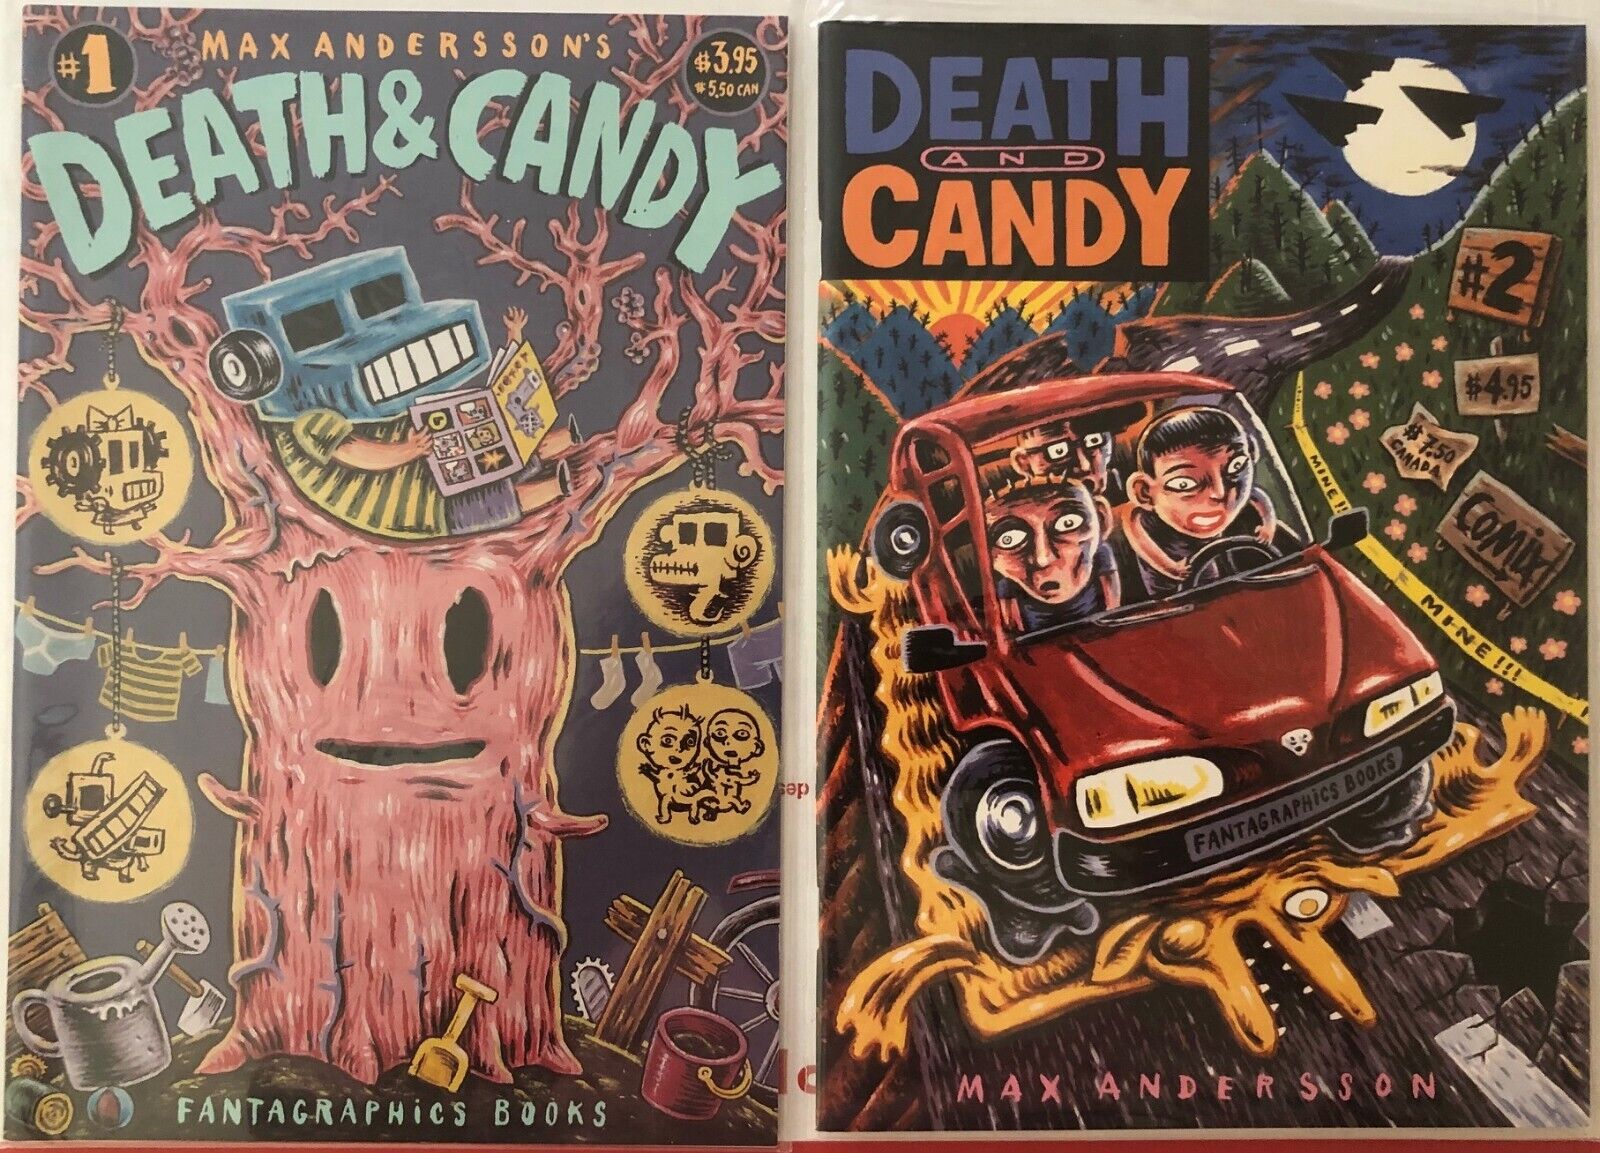 DEATH & CANDY #1 & 2  NM  Max Andersson